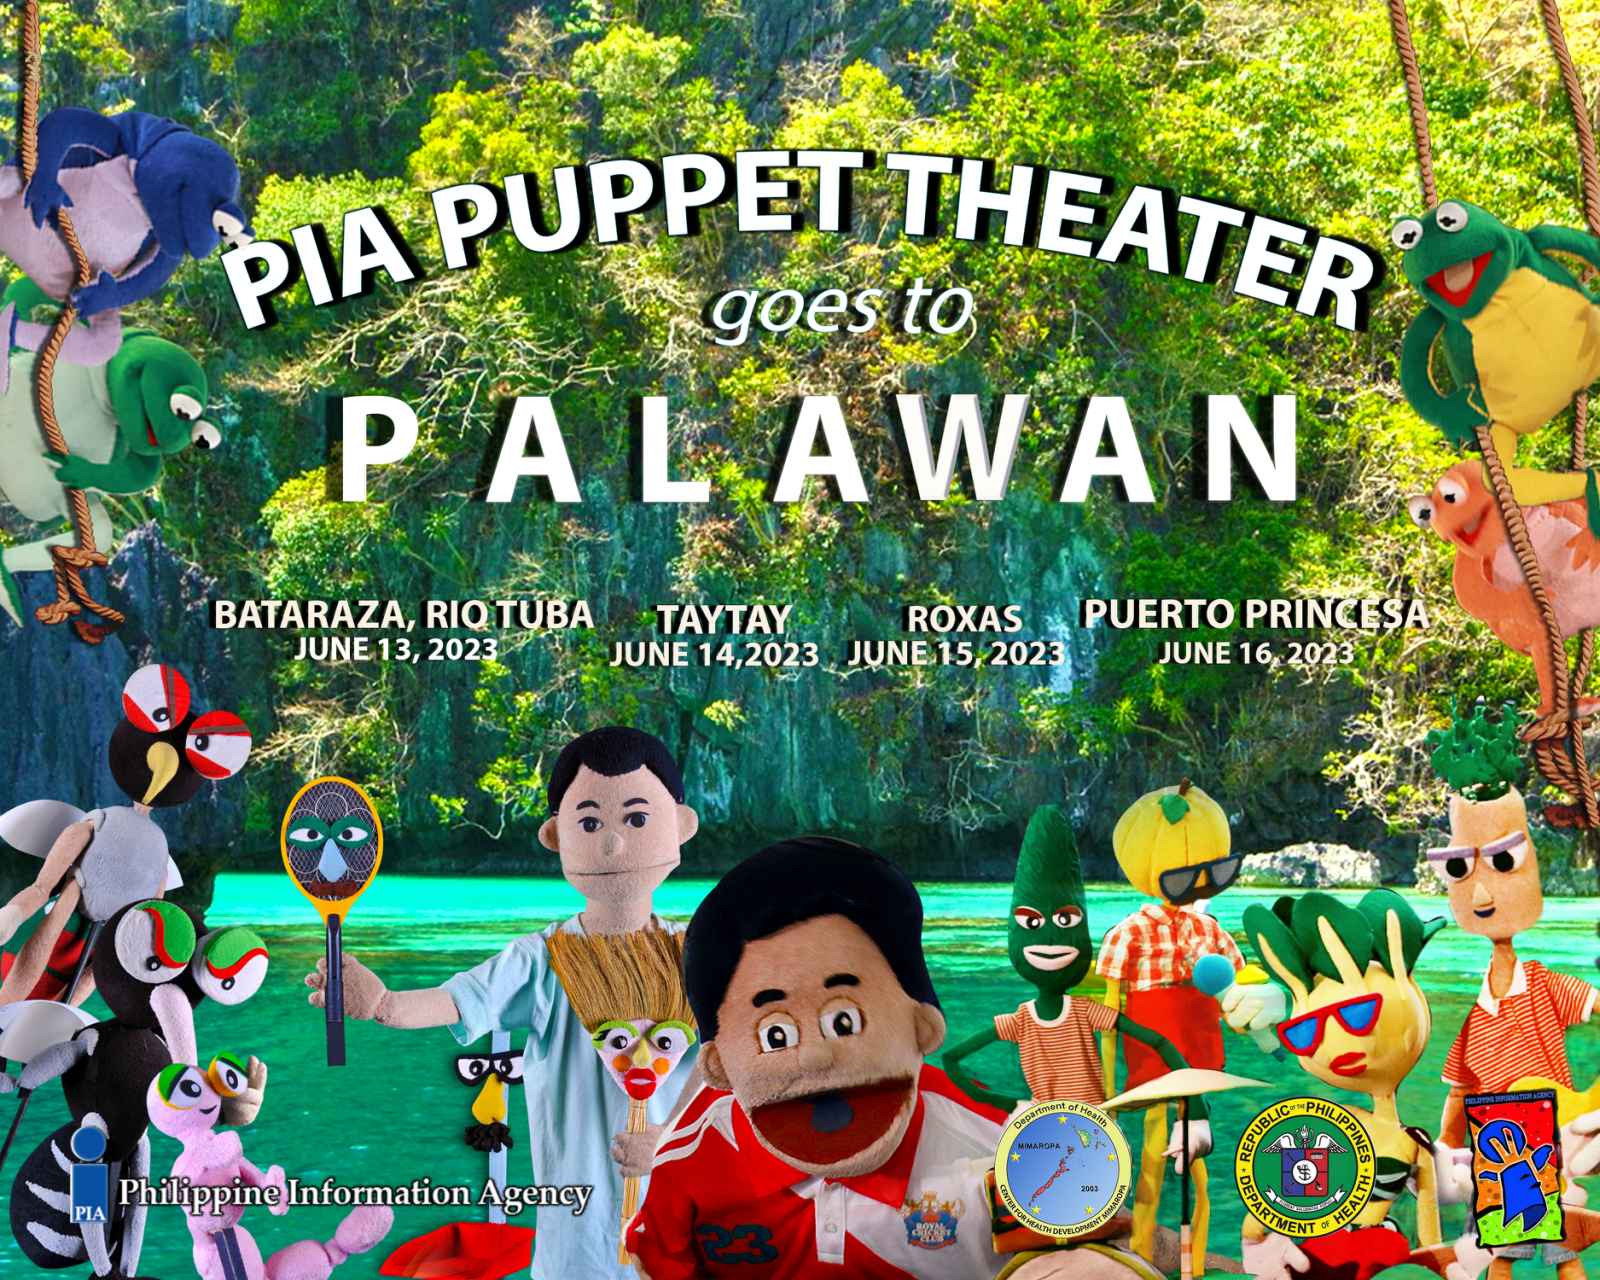 PIA Puppet Theater goes to Palawan